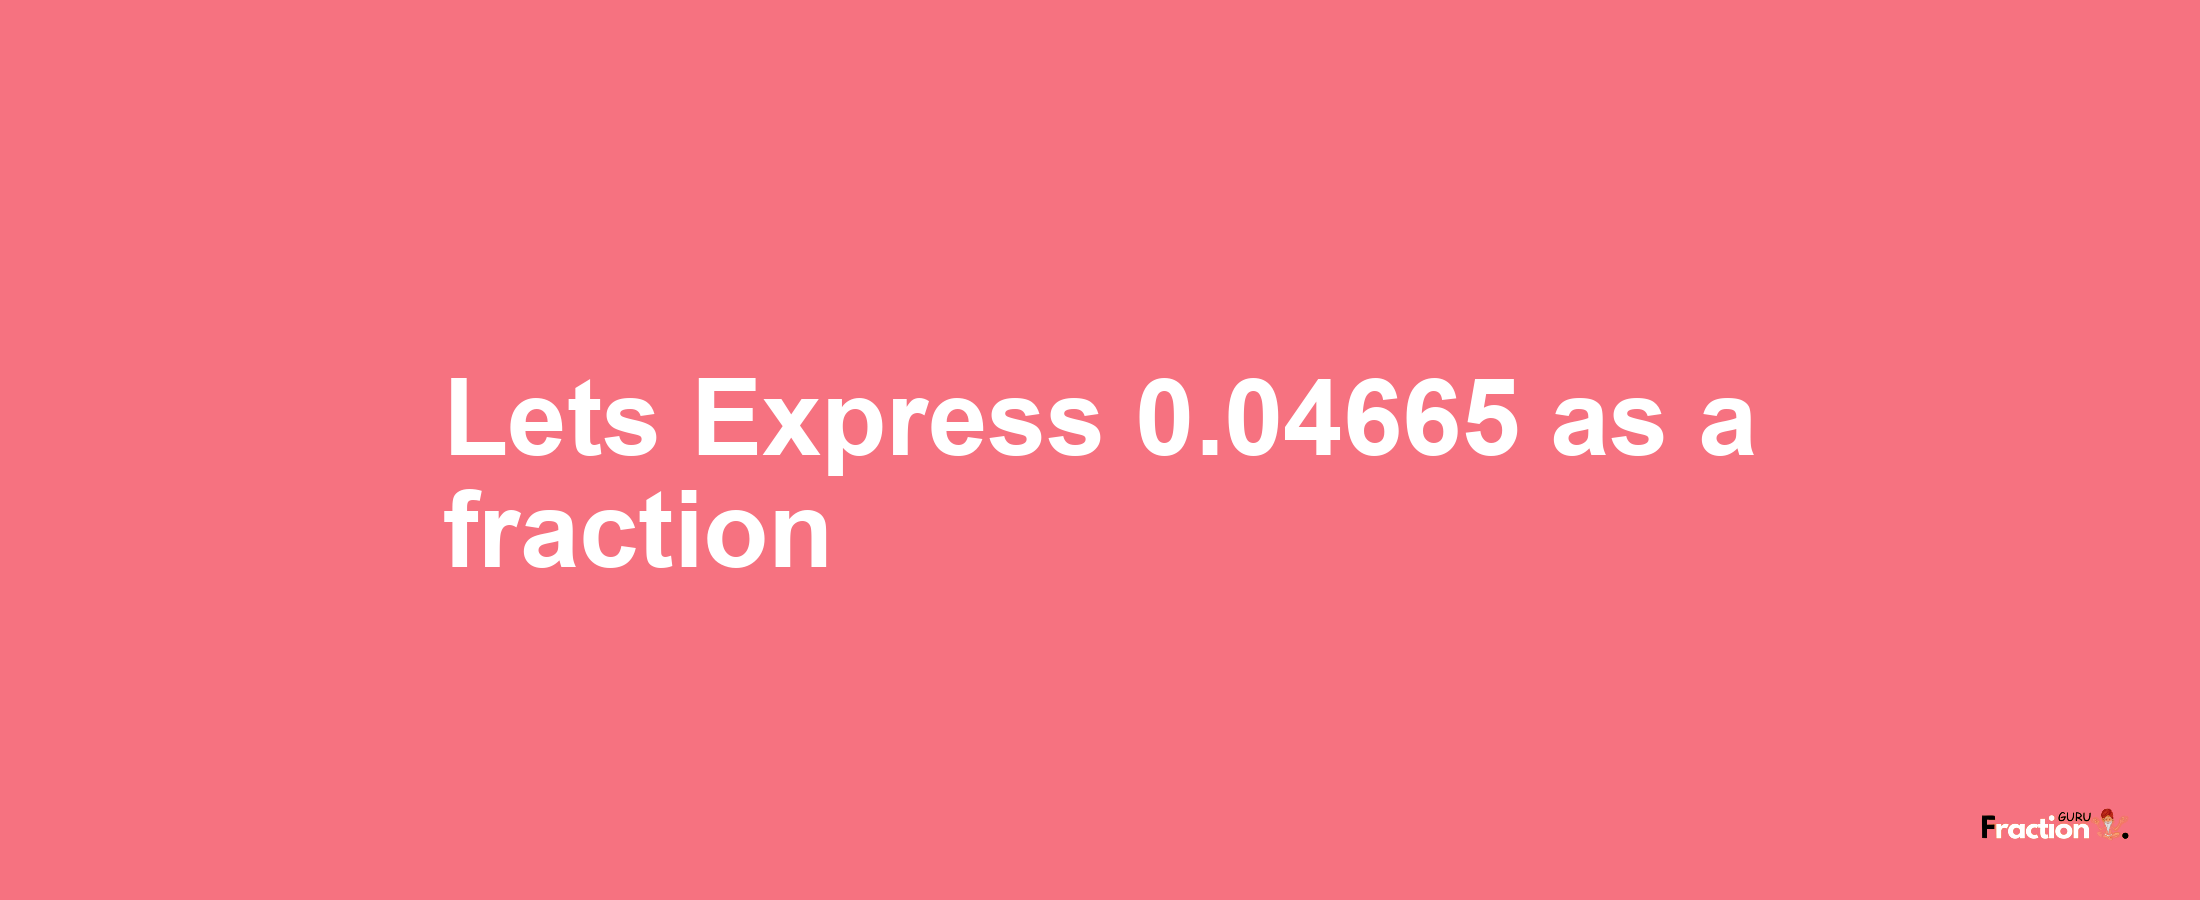 Lets Express 0.04665 as afraction